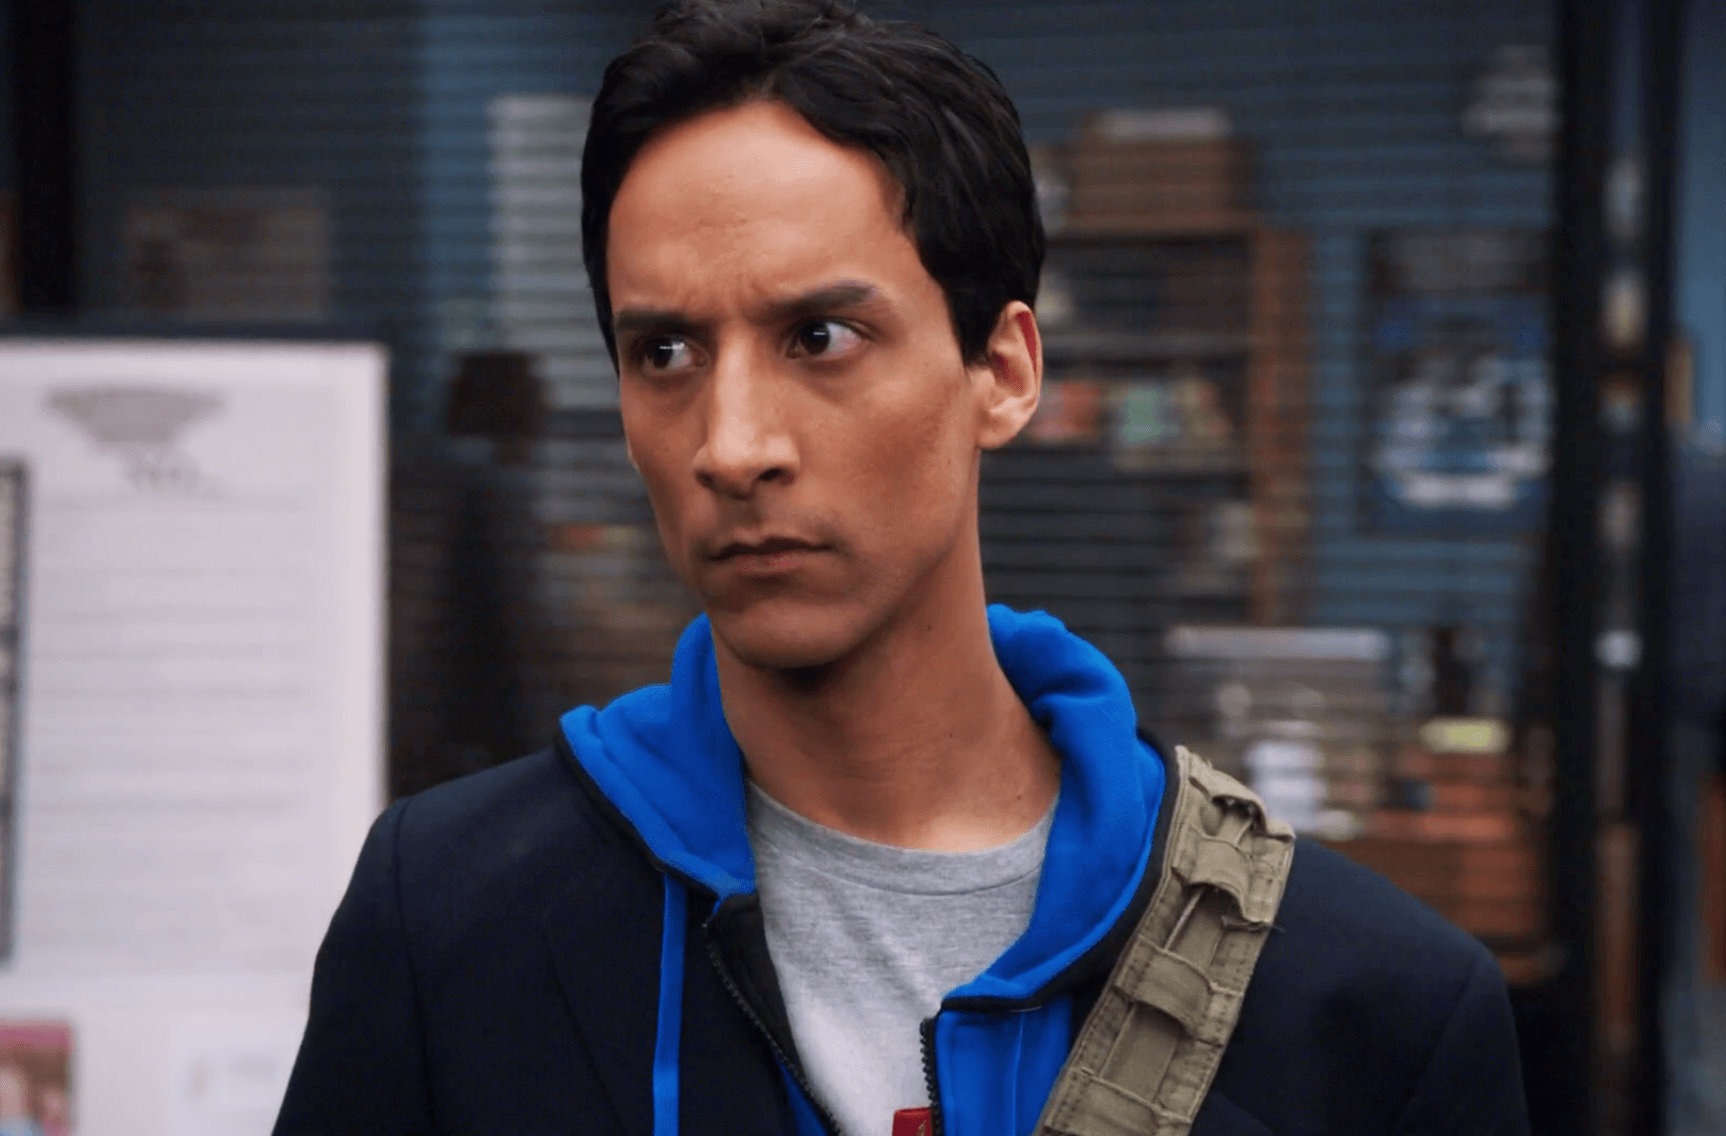 Danny Pudi as Abed on Community